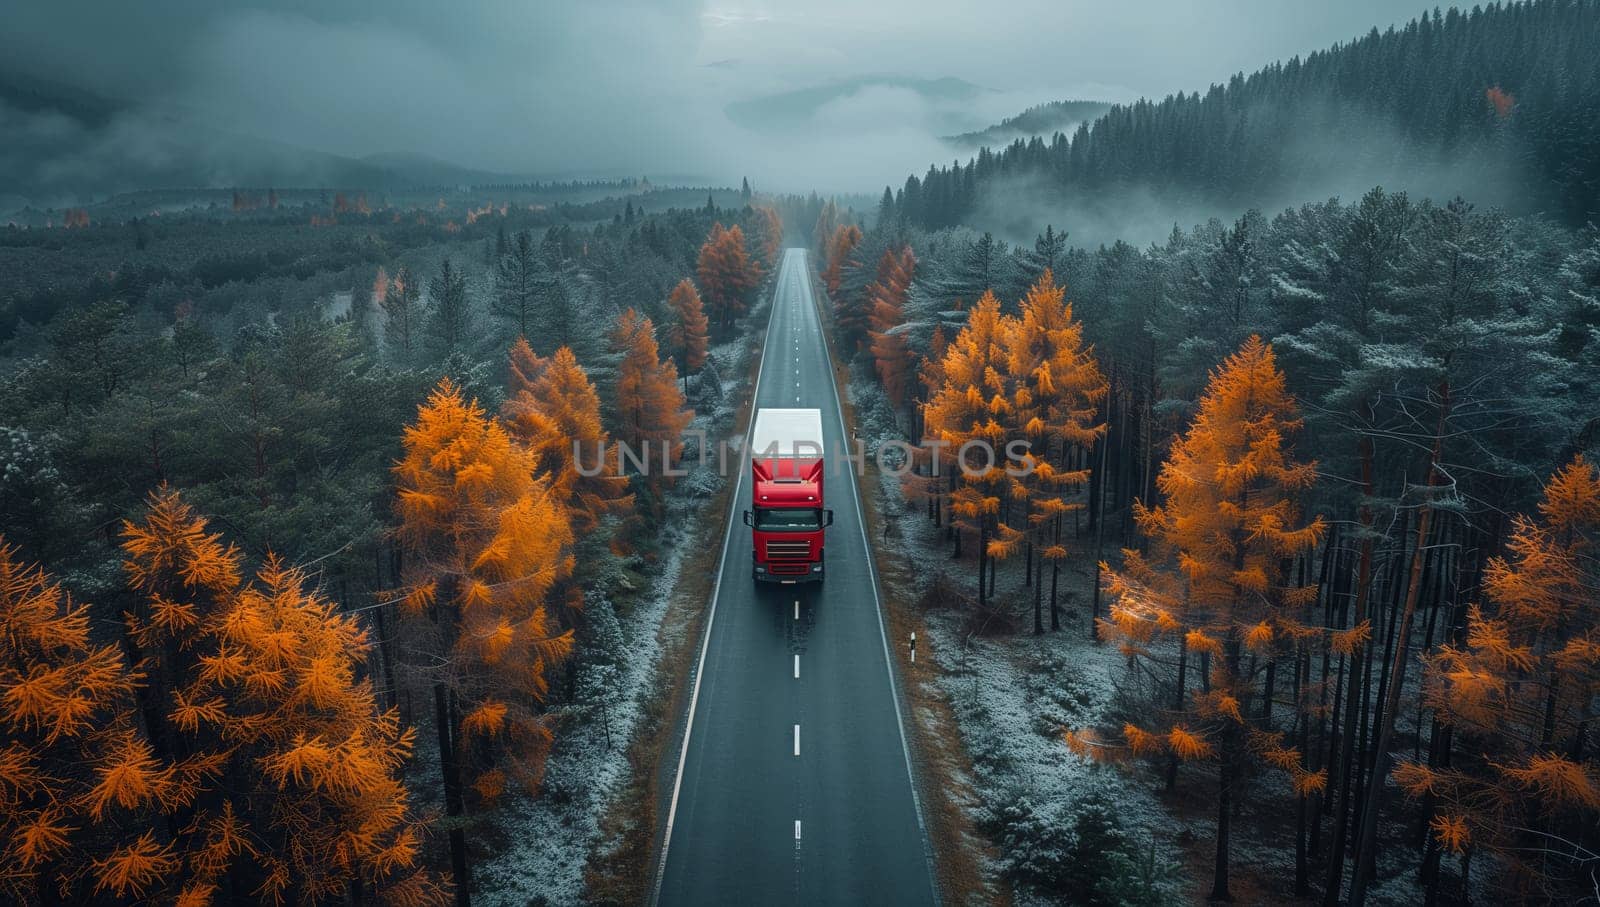 An aerial view of a vehicle driving on an asphalt road surrounded by trees in a natural landscape ecoregion, under a cloudy sky